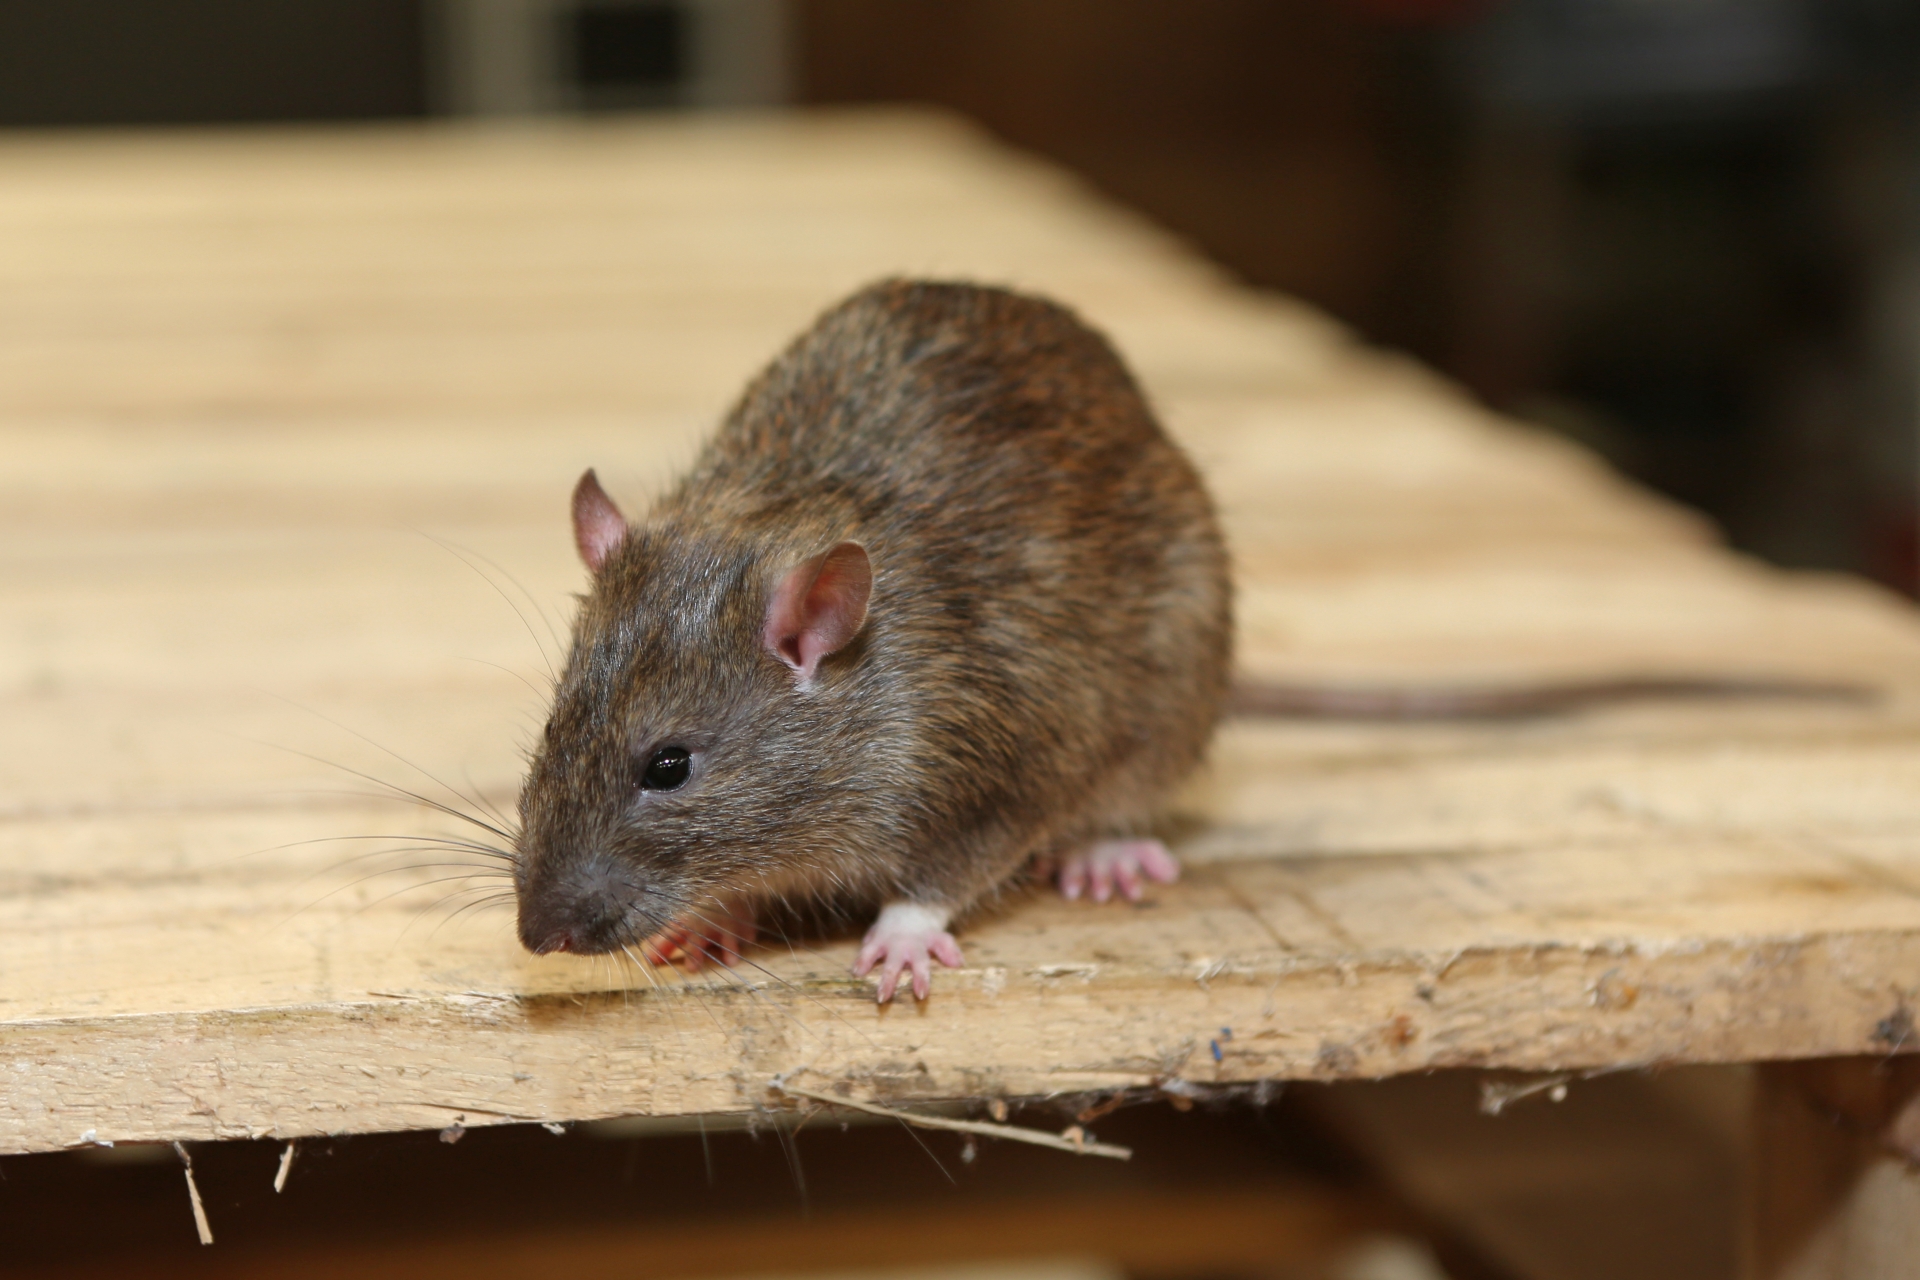 Rat Control, Pest Control in Orsett, Chafford Hundred, RM16. Call Now 020 8166 9746